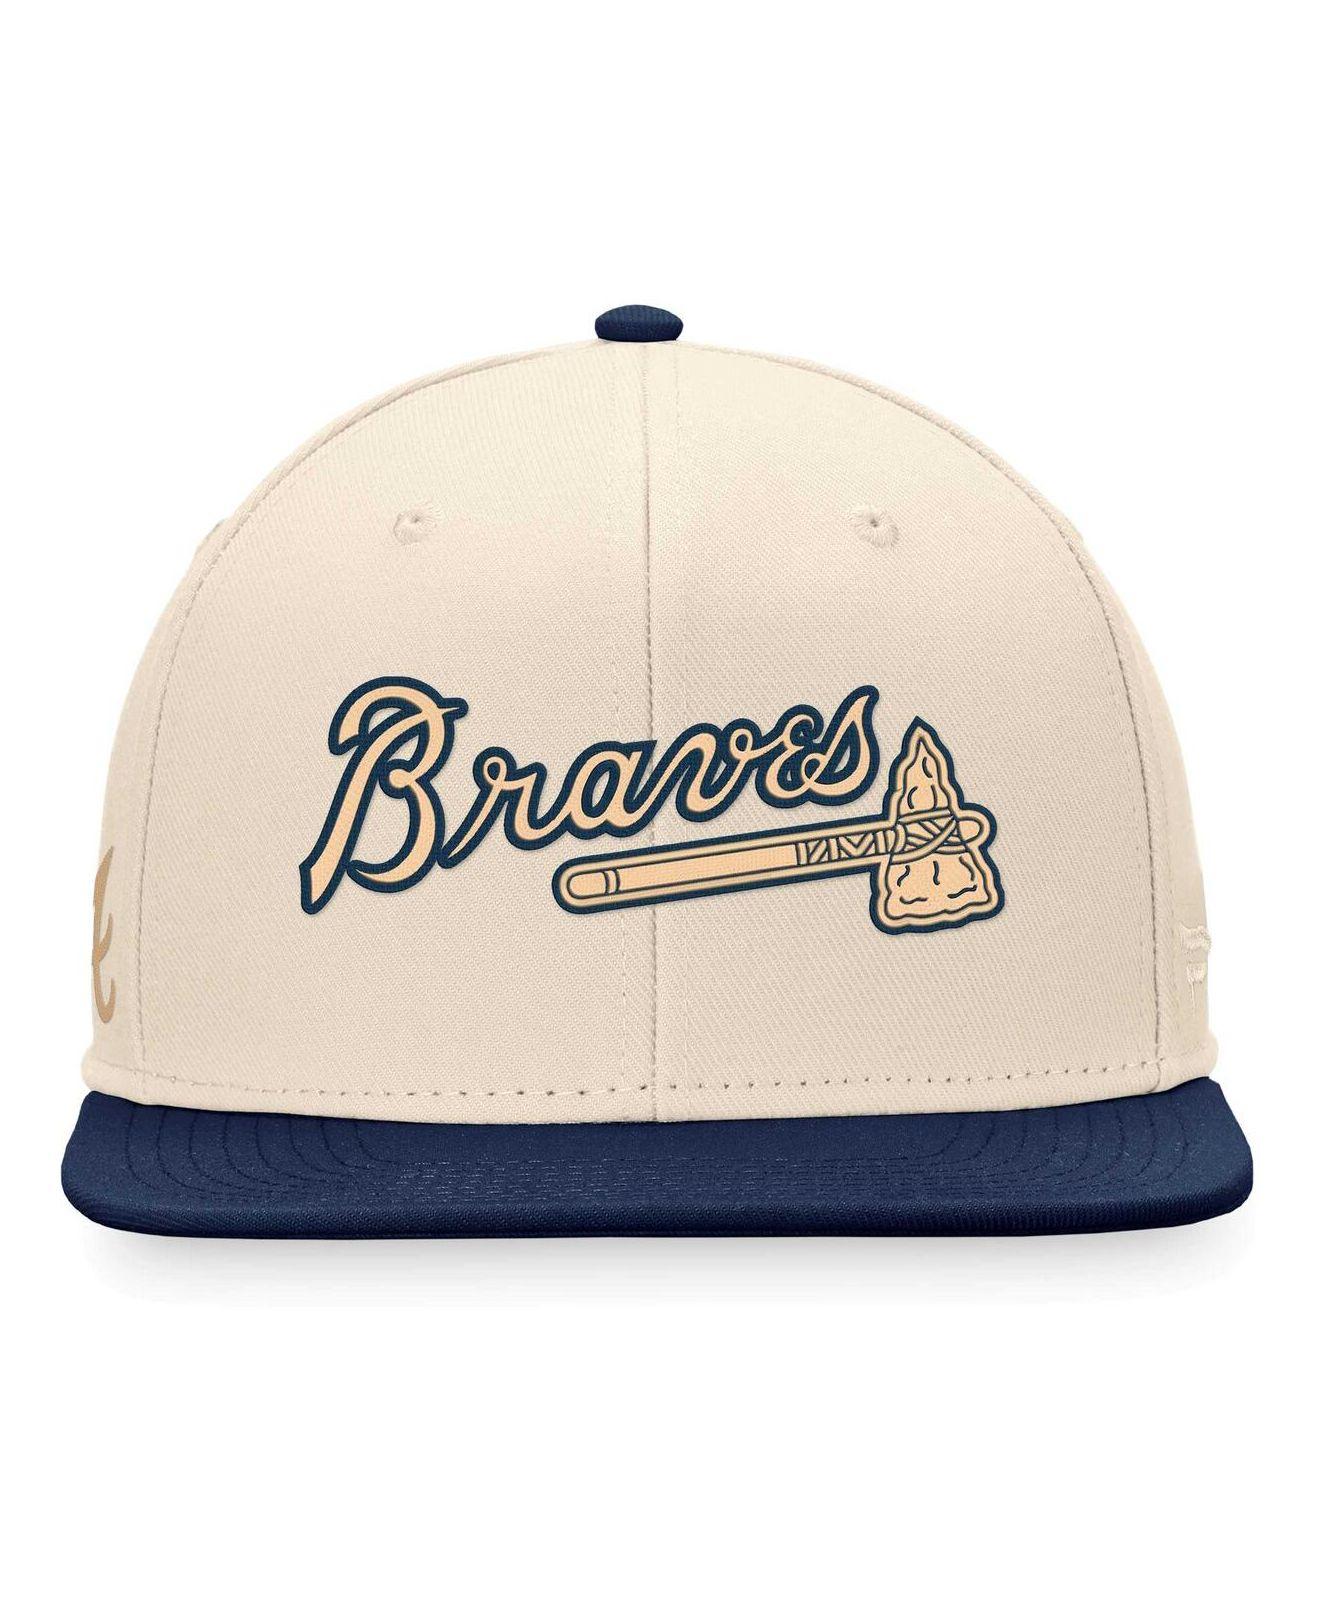 Men's Fanatics Branded Navy Milwaukee Brewers Iconic Team Patch